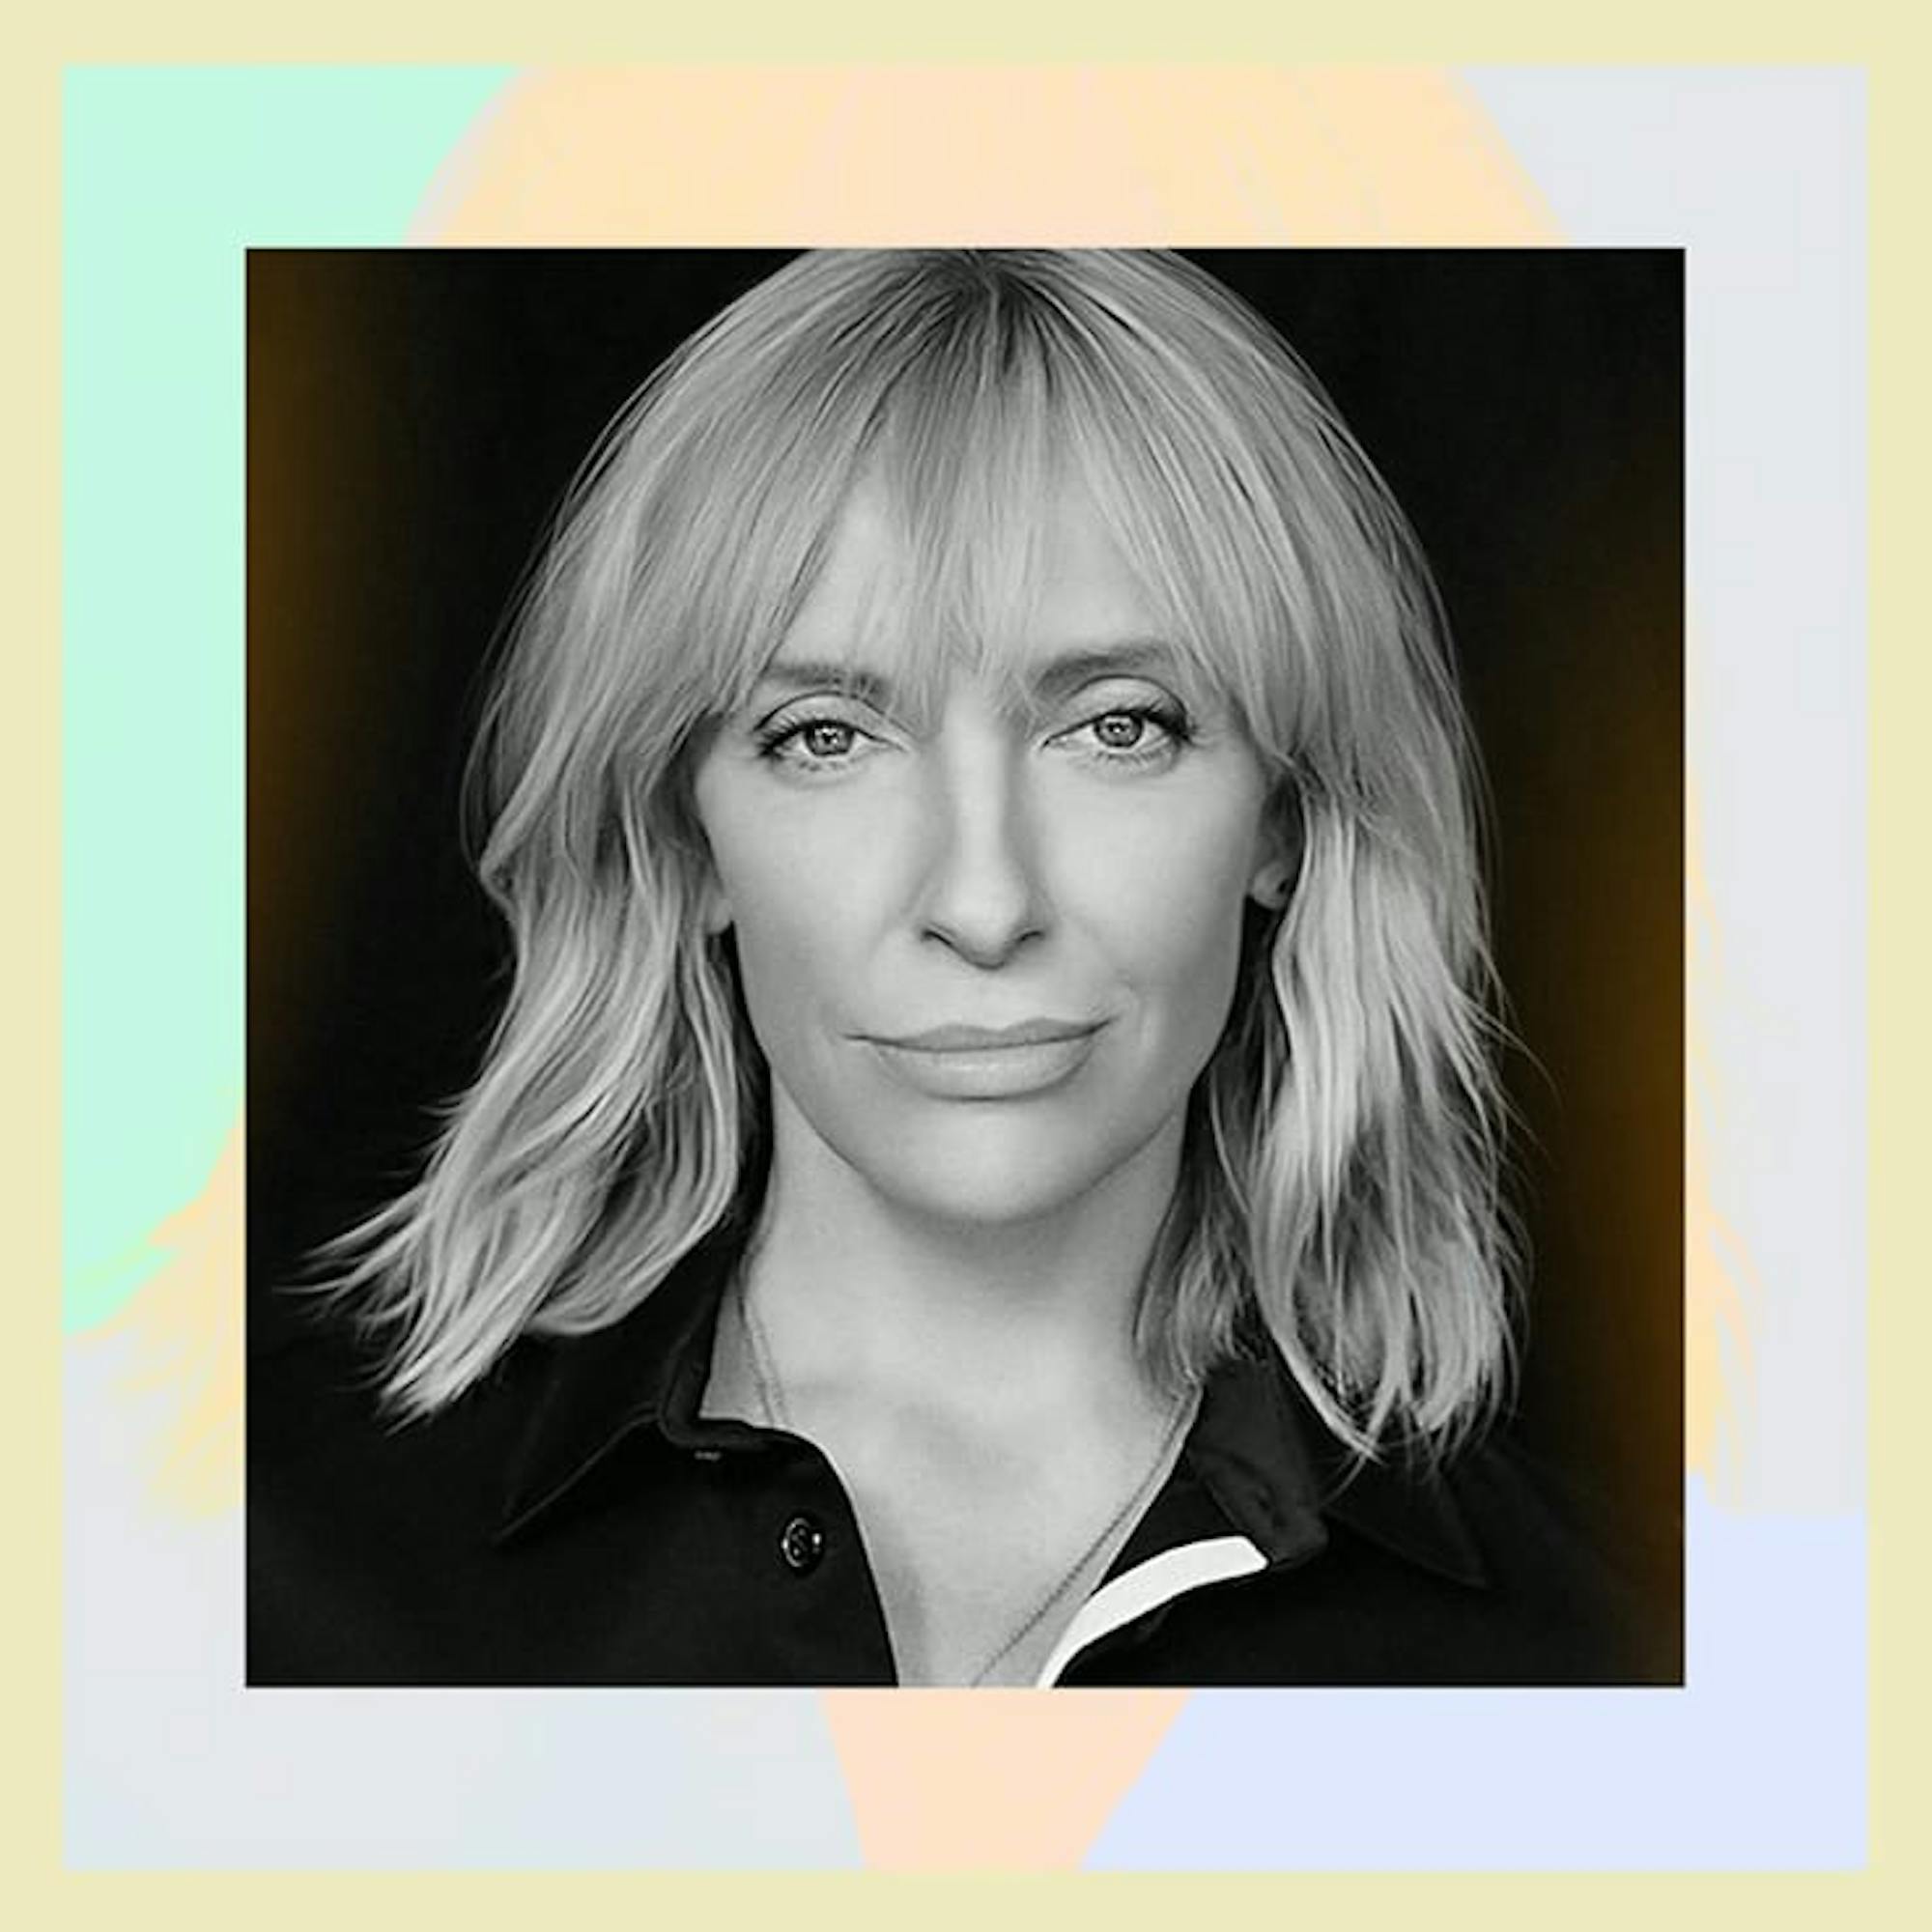 Toni Collette: Supporting actress in a limited series or movie, Unbelievable